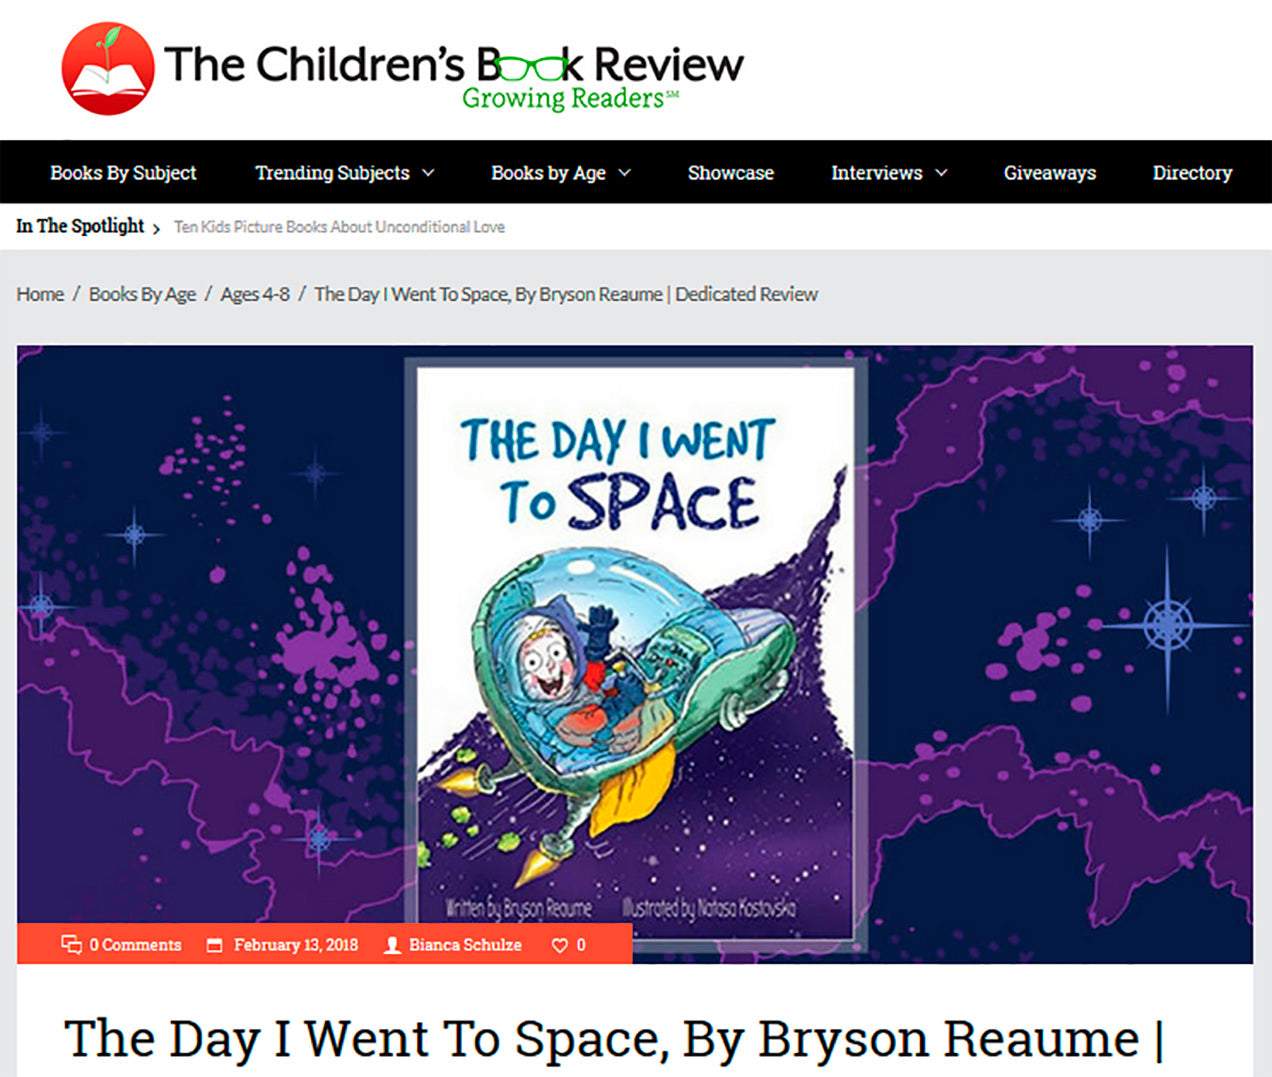 The Day I Went to Space reviewed on The Children's Book Review 